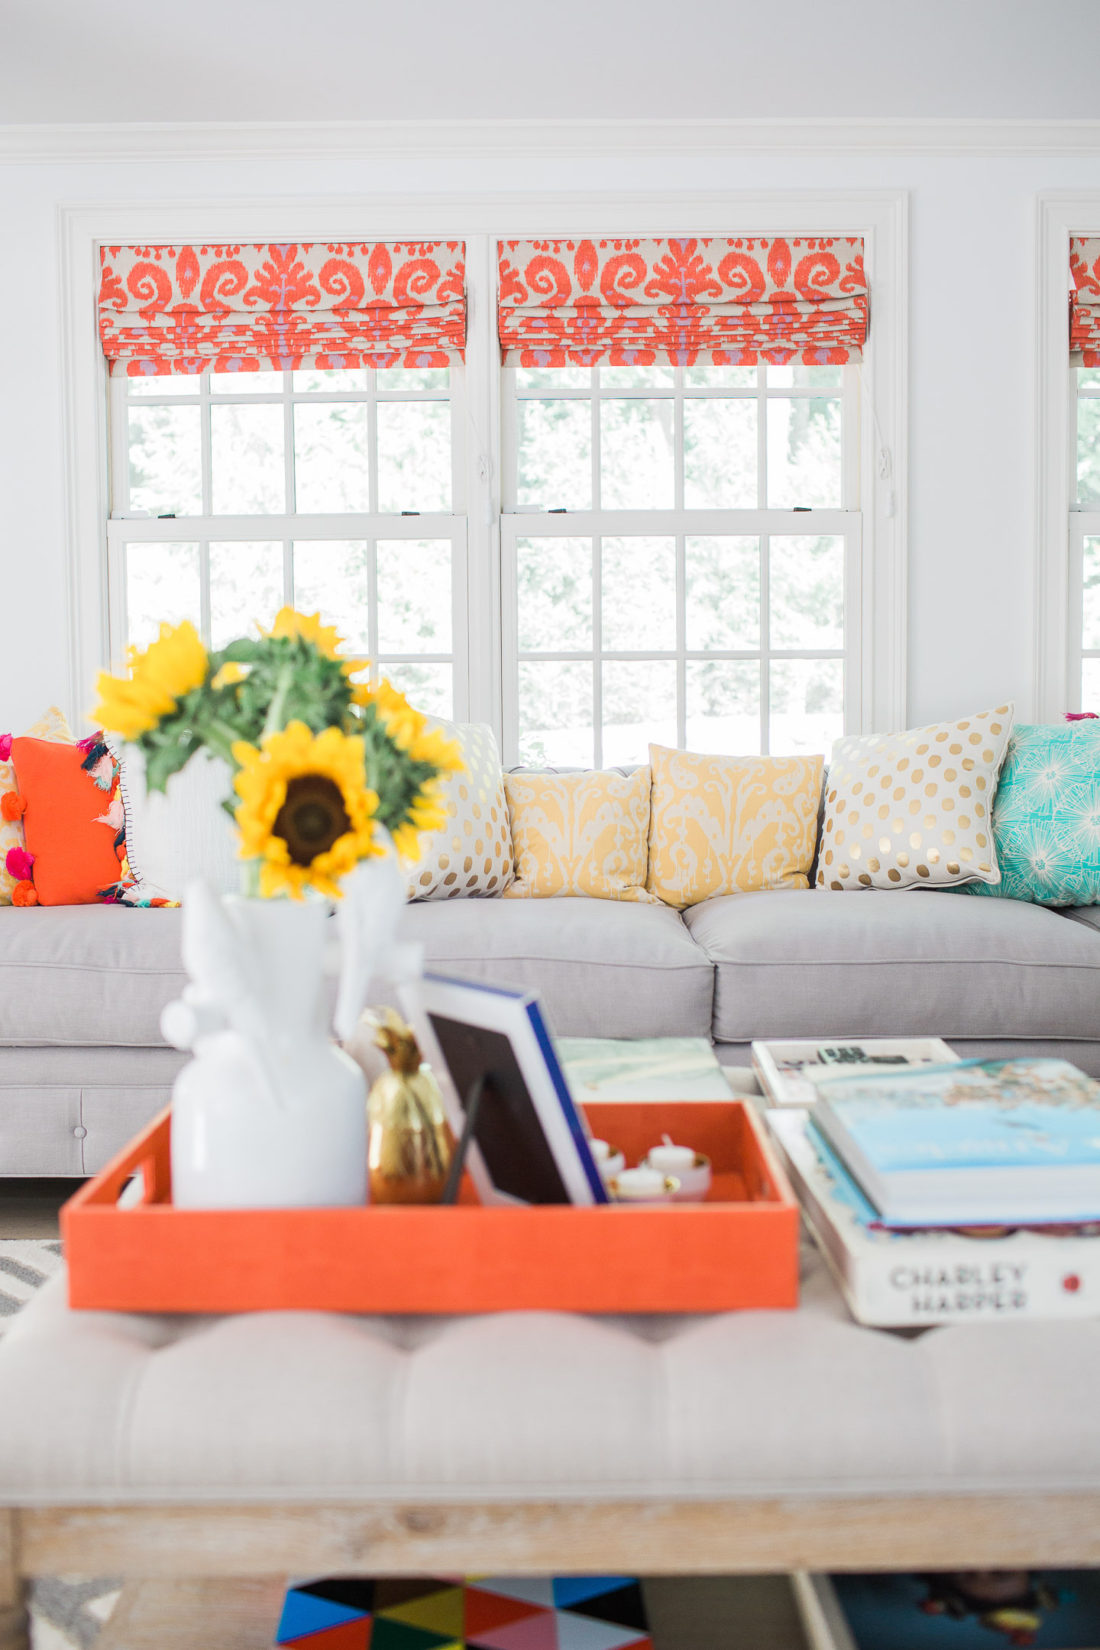 A colorful view of Eva Amurri Martino's Family room couch and coffee table ottoman with custom orange and magenta ikat roman shades